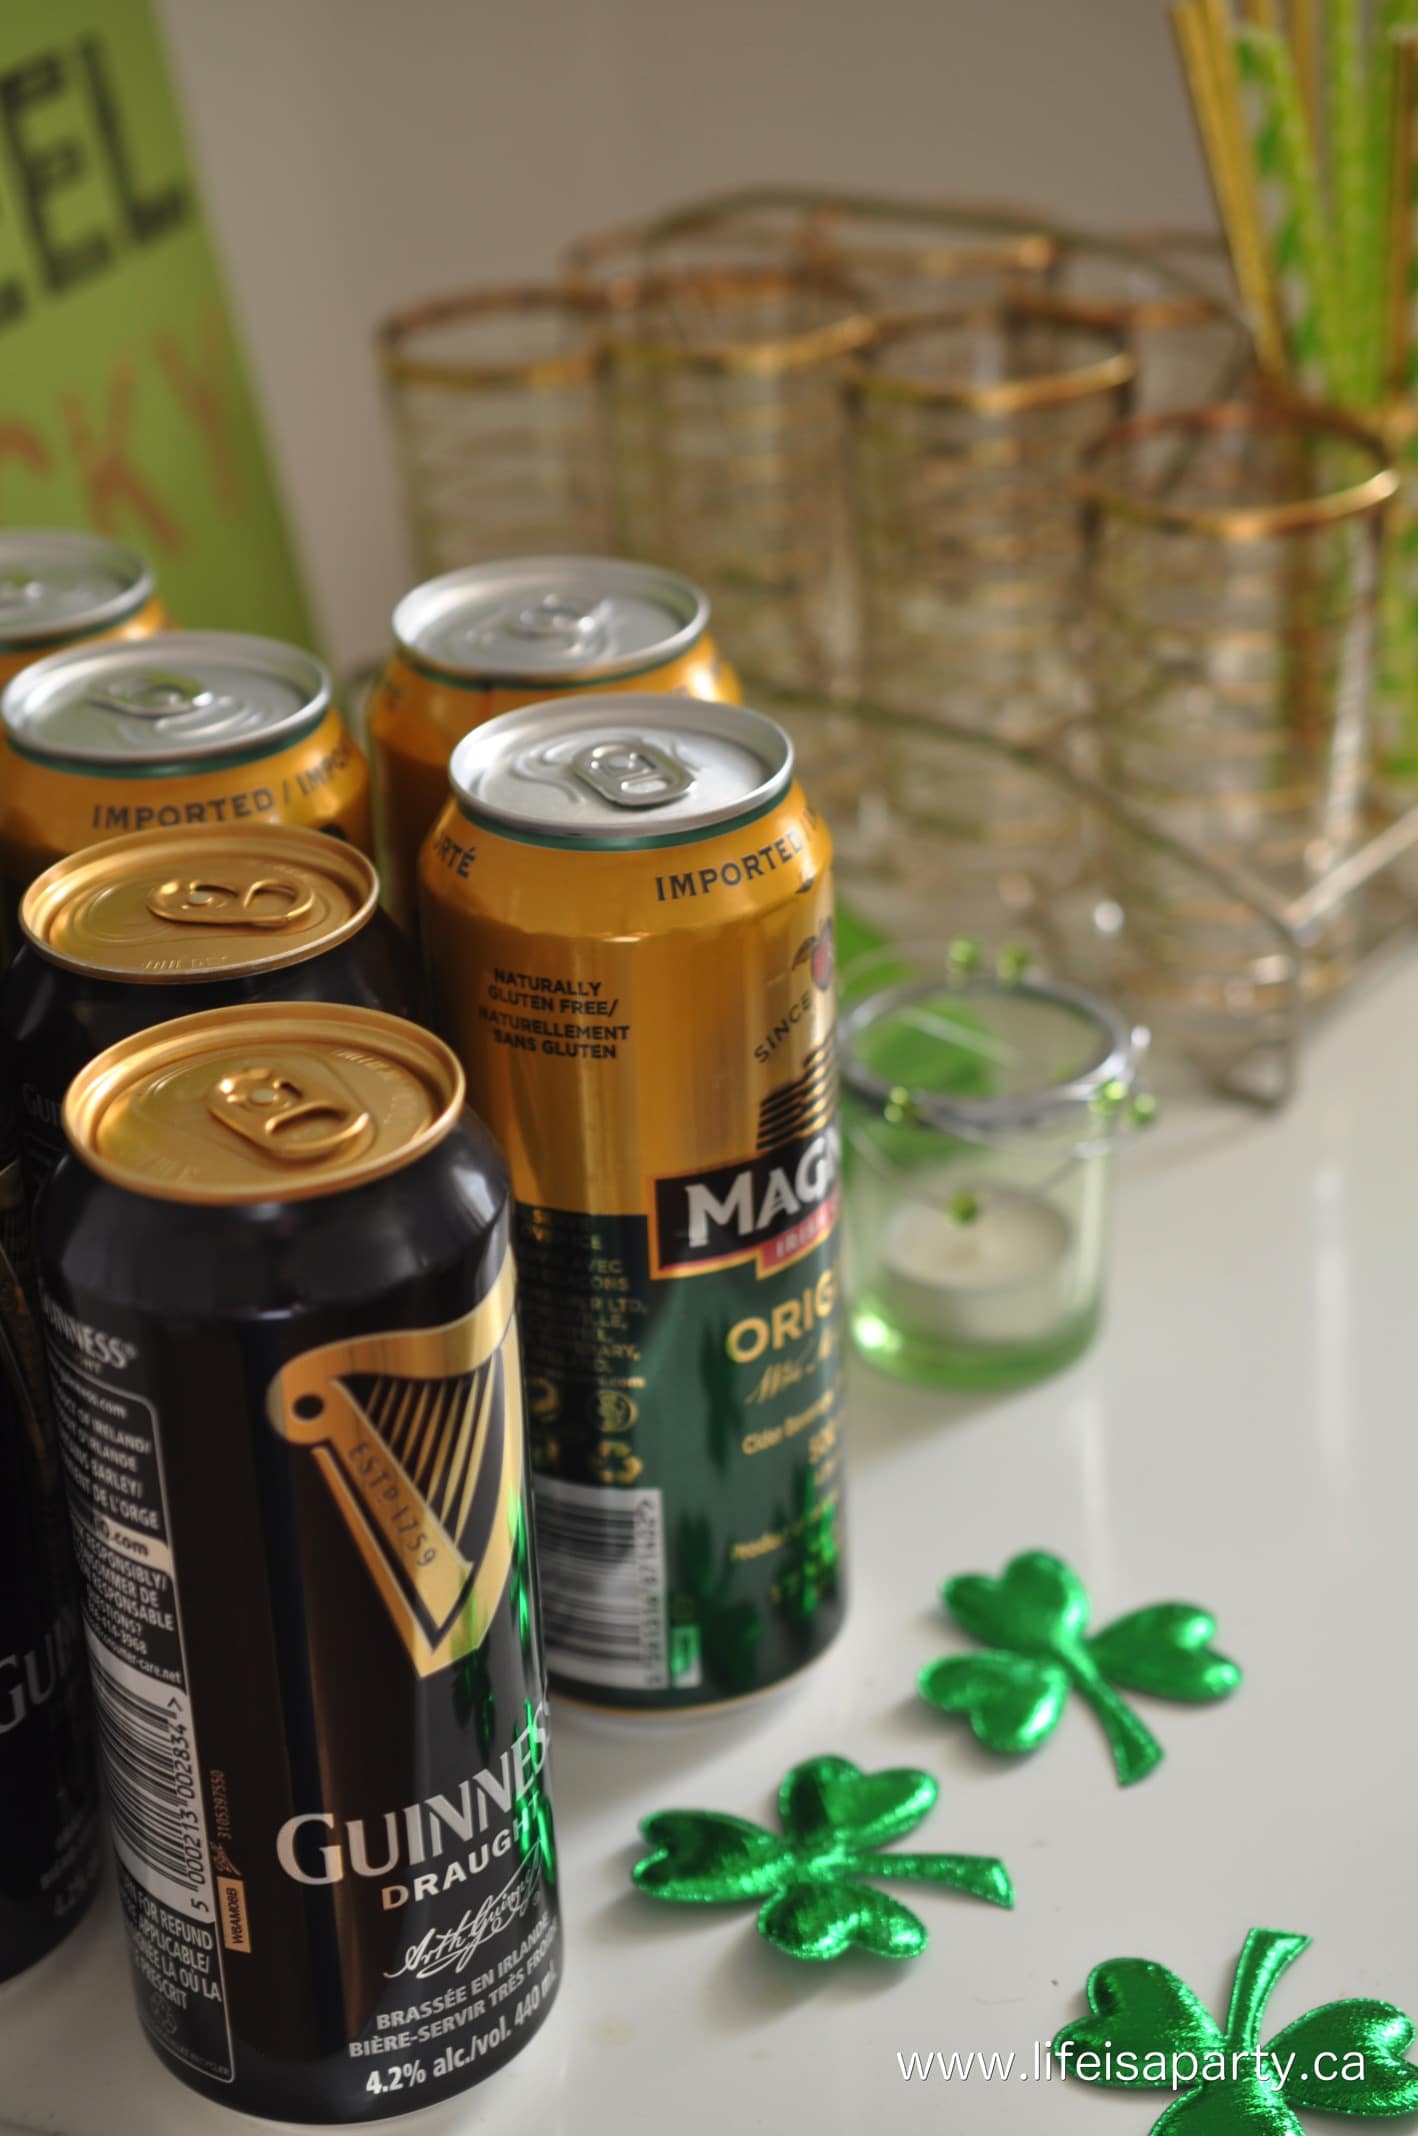 St. Patrick's Night In -Dinner and a Movie Ideas for St. Patrick's Day: recipes, Irish drink ideas, and favourite top Irish films.